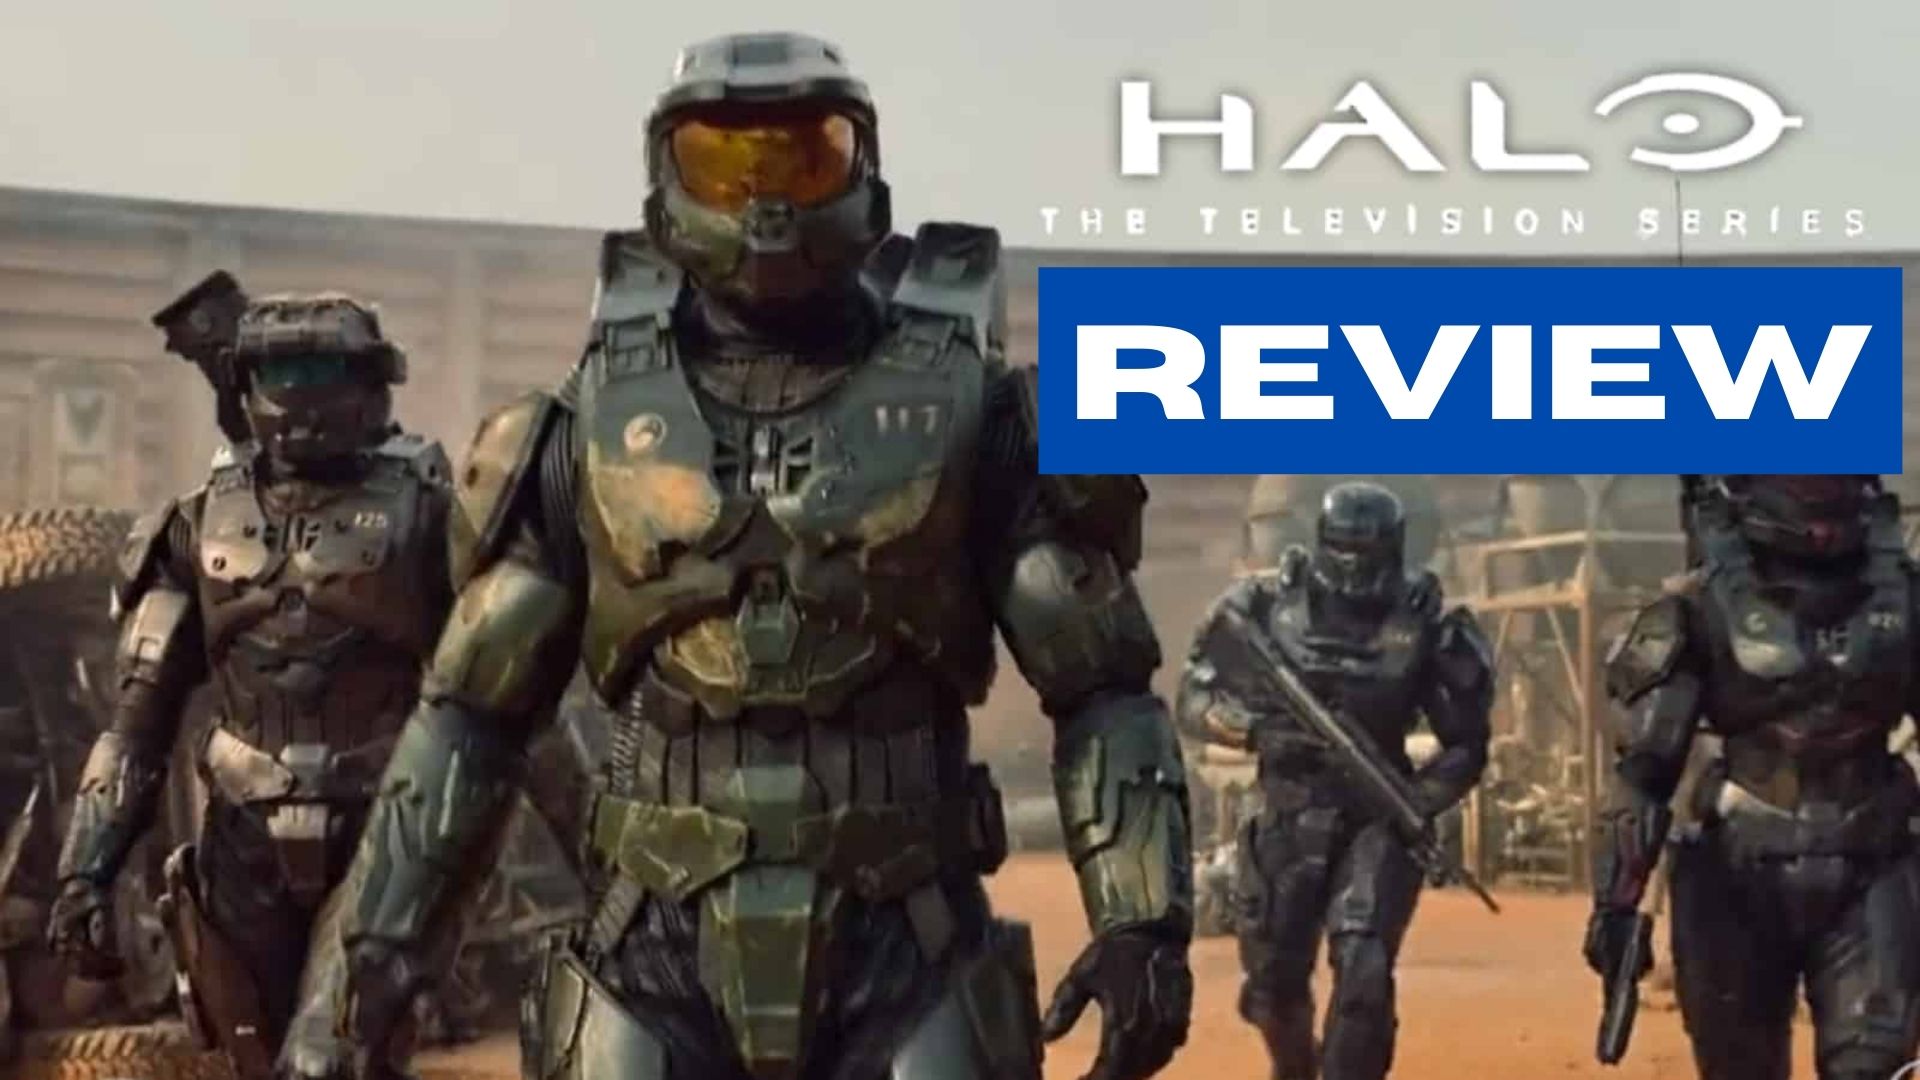 Halo Review. Halo paramount review 2022 tv series. Halo Season 1 episode 1 Review. Halo season 1 review. Halo tv series review.